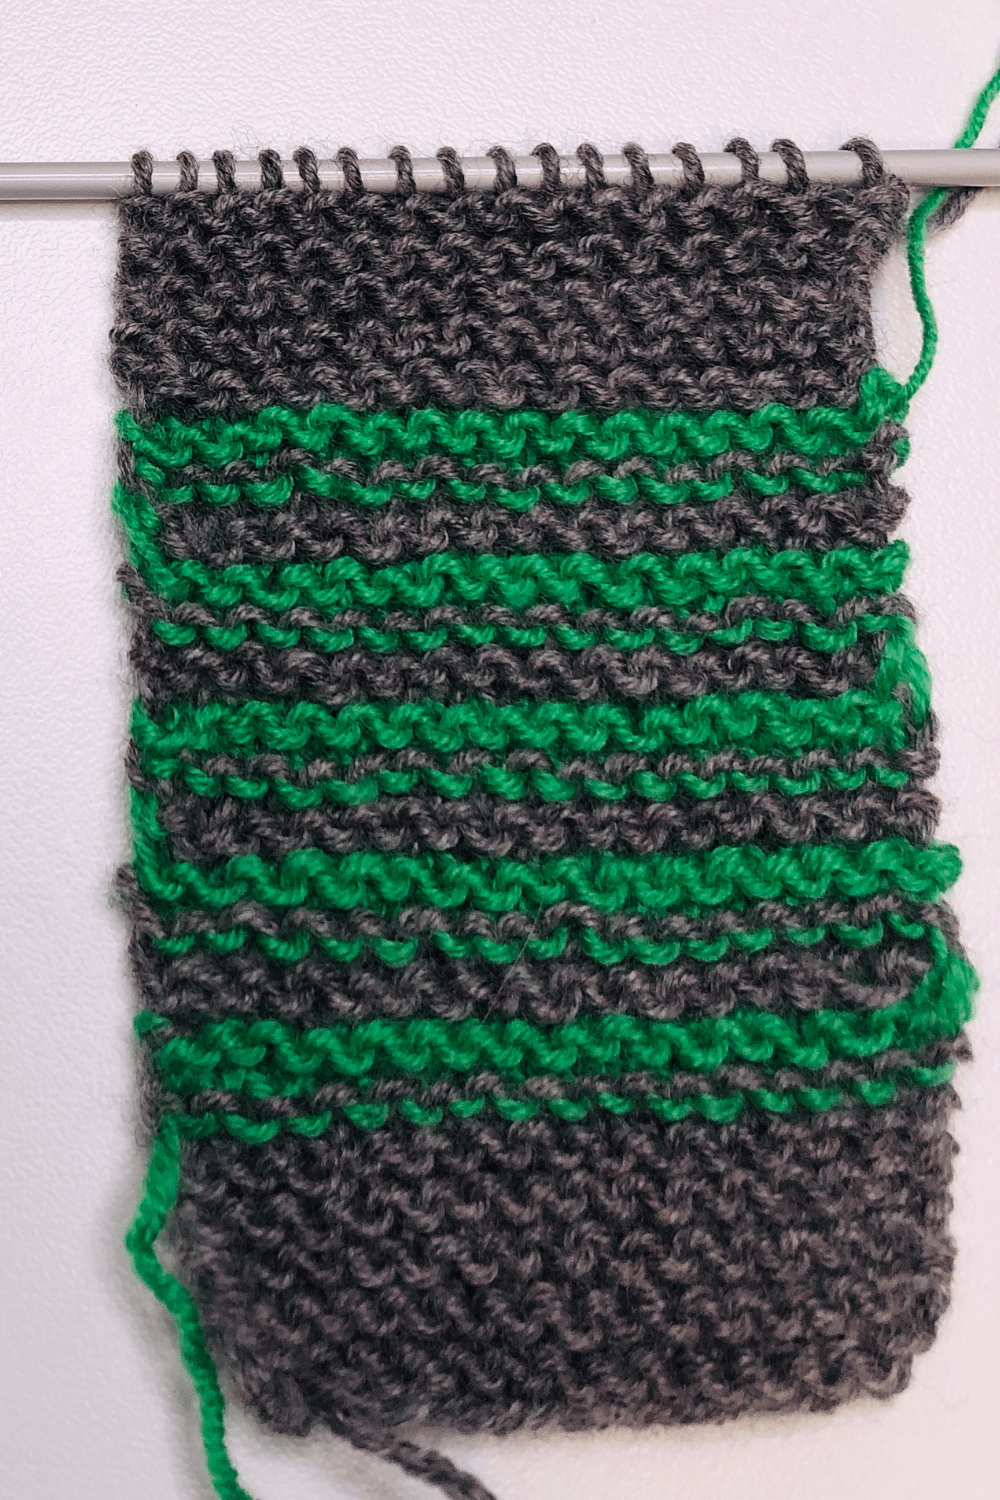 An example on how messy garter stitch stripes can look if you're not careful!